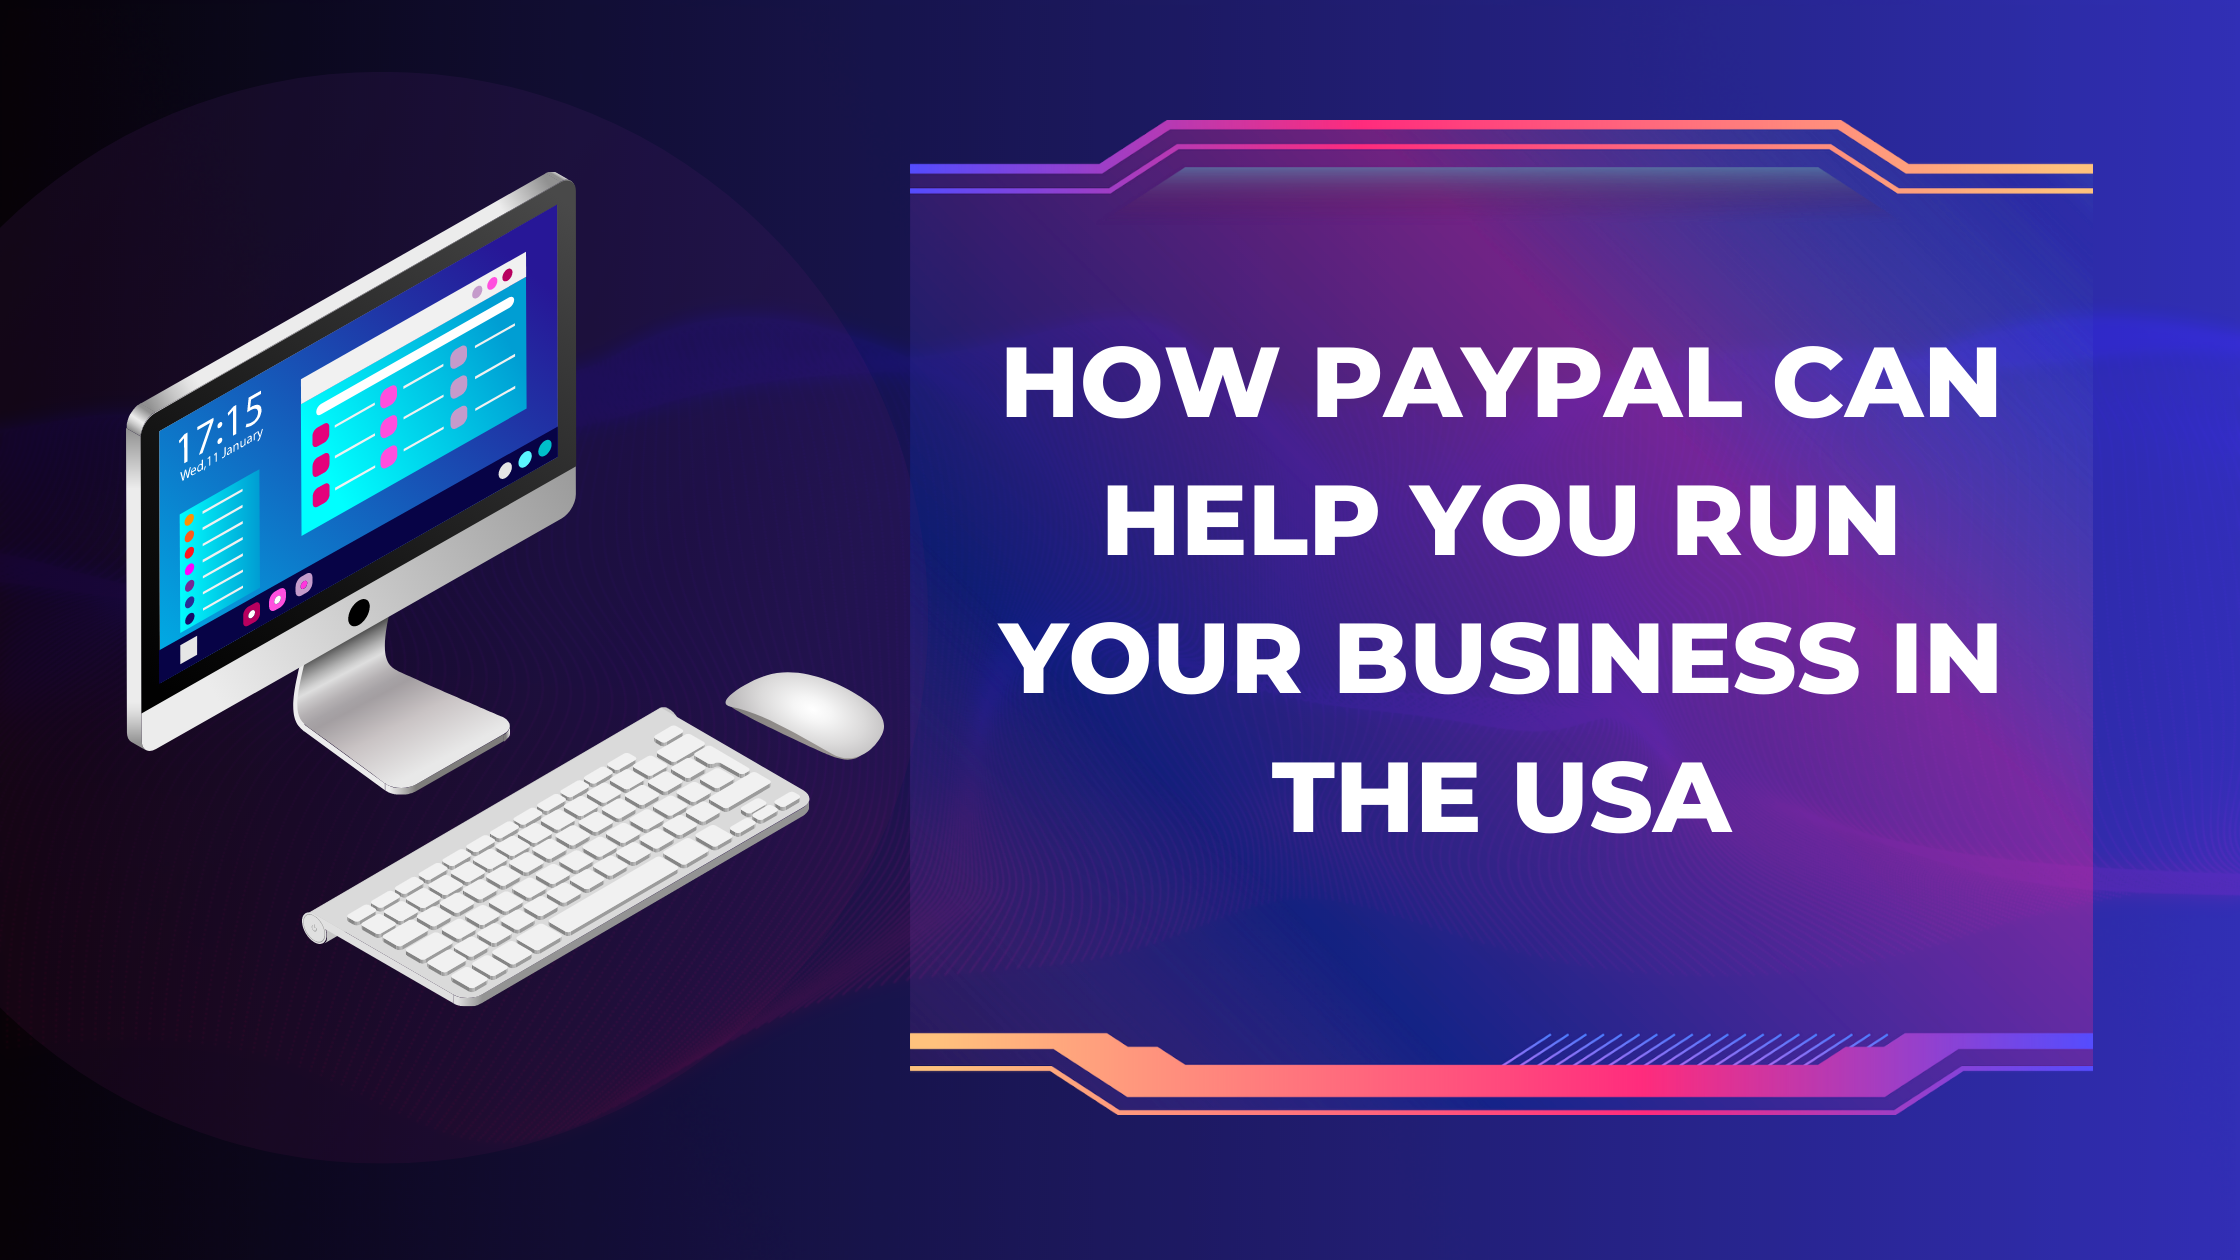 How PayPal Can Help You Run Your Business in the USA